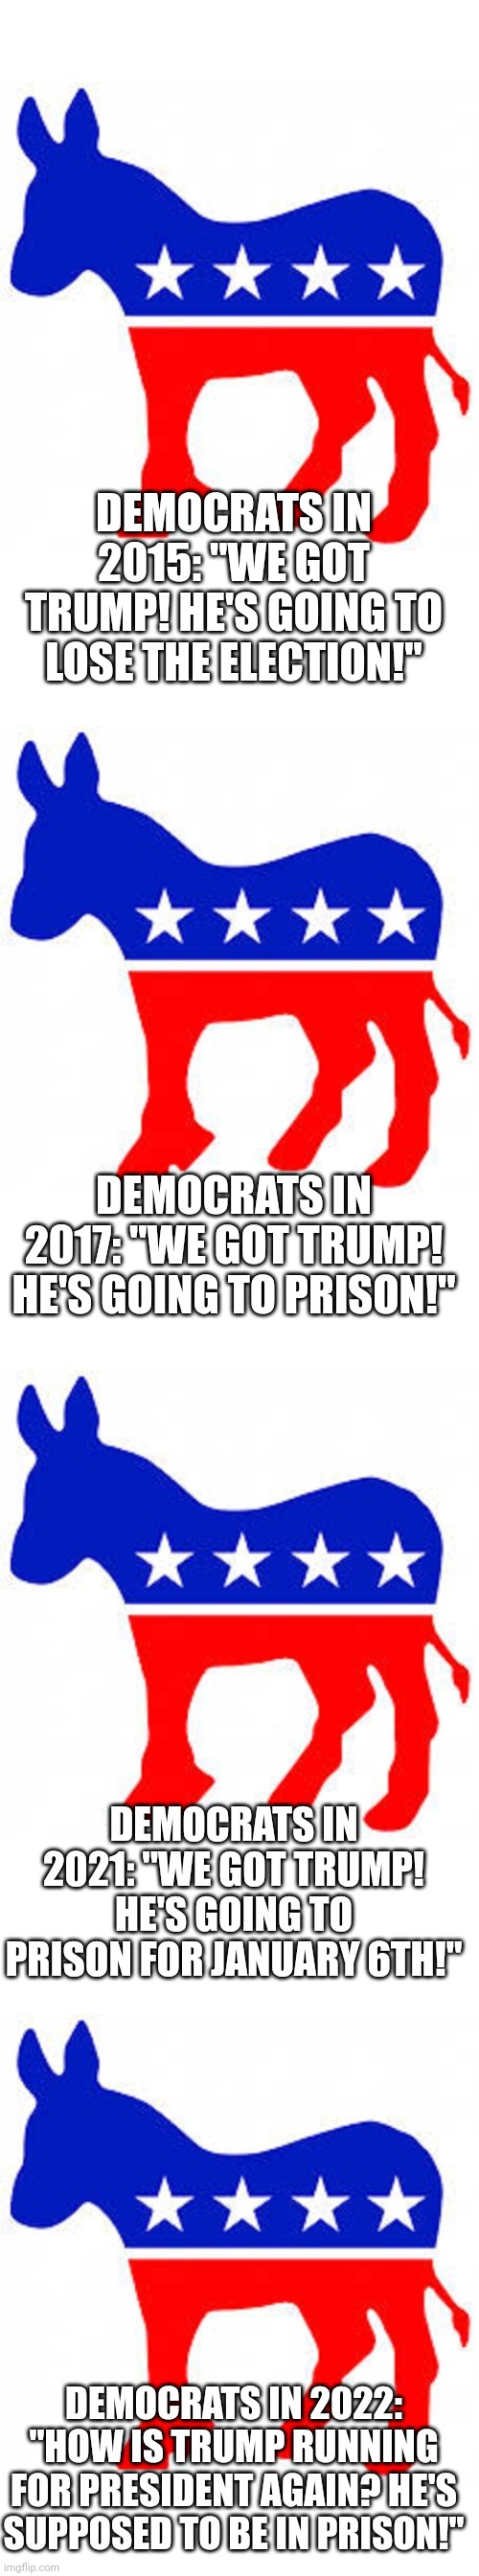 Democrats living in their delusional bubble. | DEMOCRATS IN 2015: "WE GOT TRUMP! HE'S GOING TO LOSE THE ELECTION!"; DEMOCRATS IN 2017: "WE GOT TRUMP! HE'S GOING TO PRISON!"; DEMOCRATS IN 2021: "WE GOT TRUMP! HE'S GOING TO PRISON FOR JANUARY 6TH!"; DEMOCRATS IN 2022: "HOW IS TRUMP RUNNING FOR PRESIDENT AGAIN? HE'S SUPPOSED TO BE IN PRISON!" | image tagged in democrat donkey | made w/ Imgflip meme maker